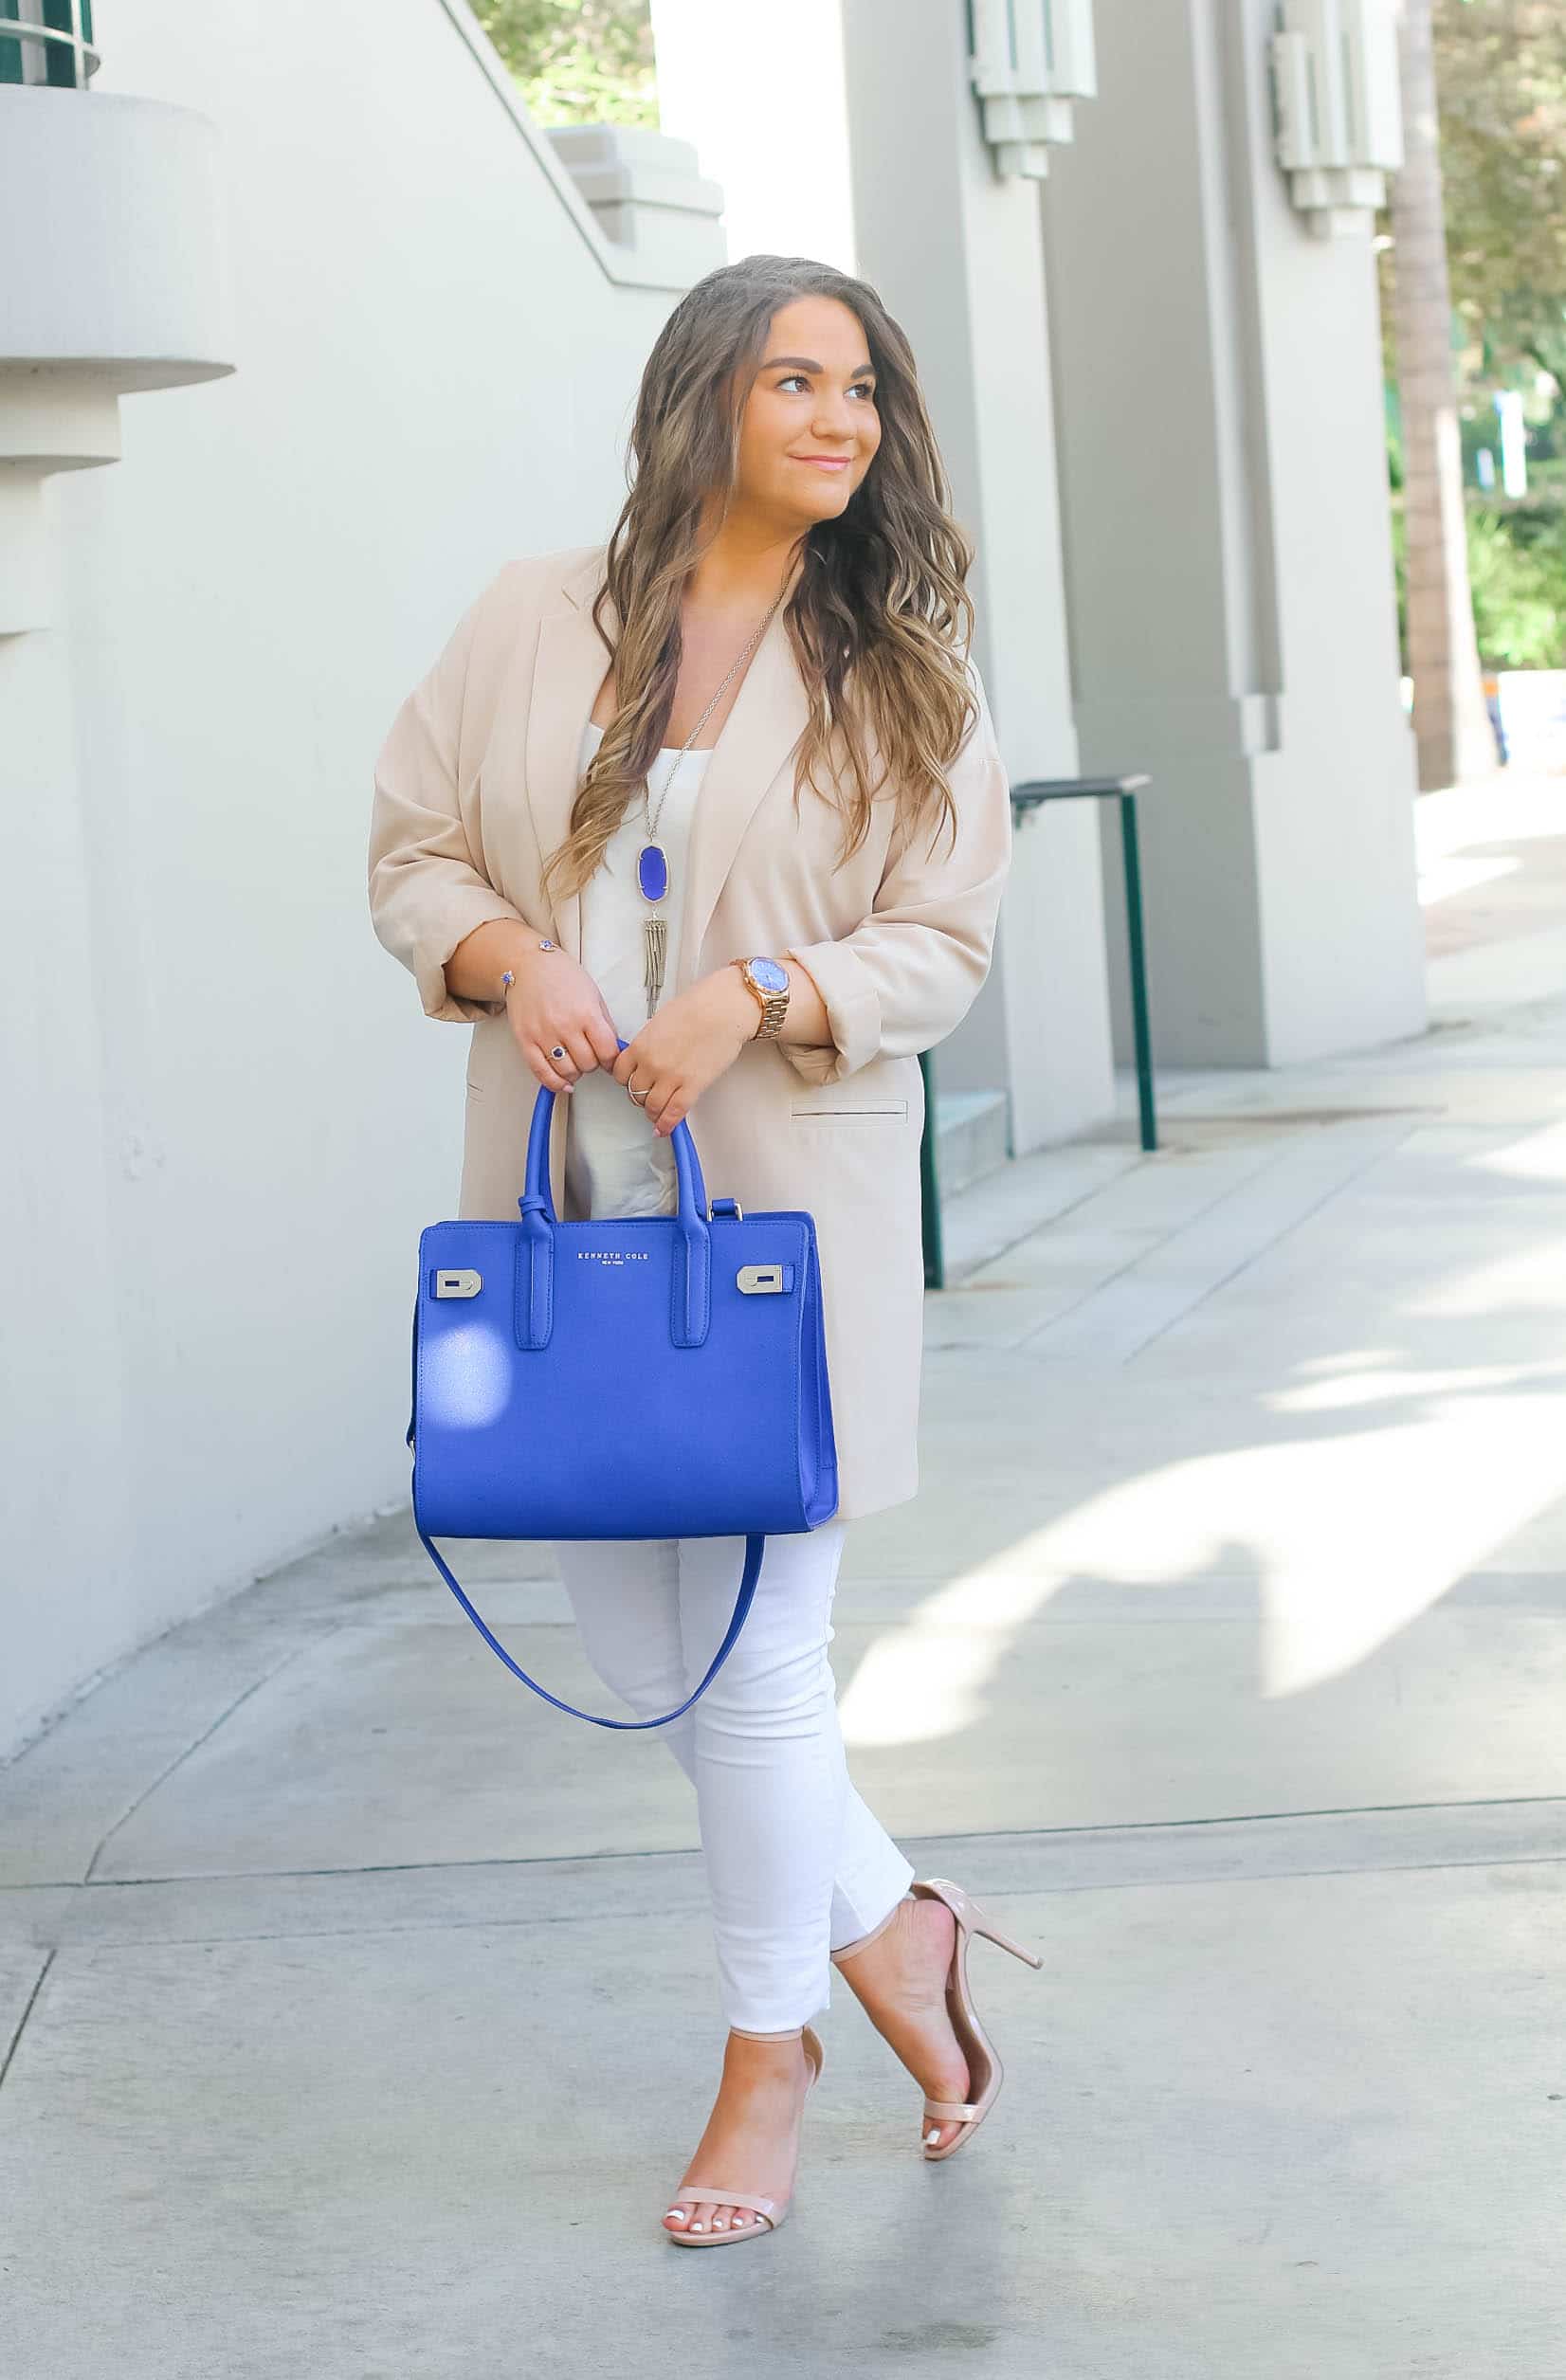 missyonmadison, fashion blogger, missyonmadison instagram, outfit inspo, la blogger, cobalt blue satchel, style blogger, summer style, nude ankle strap heels, old navy, white skinny jeans, old navy white rockstar jeans, beverly hills city hall, nude duster blazer, duster blazer, nude blazer, white chiffon camisole, topshop camisole, raybans, pop of color,